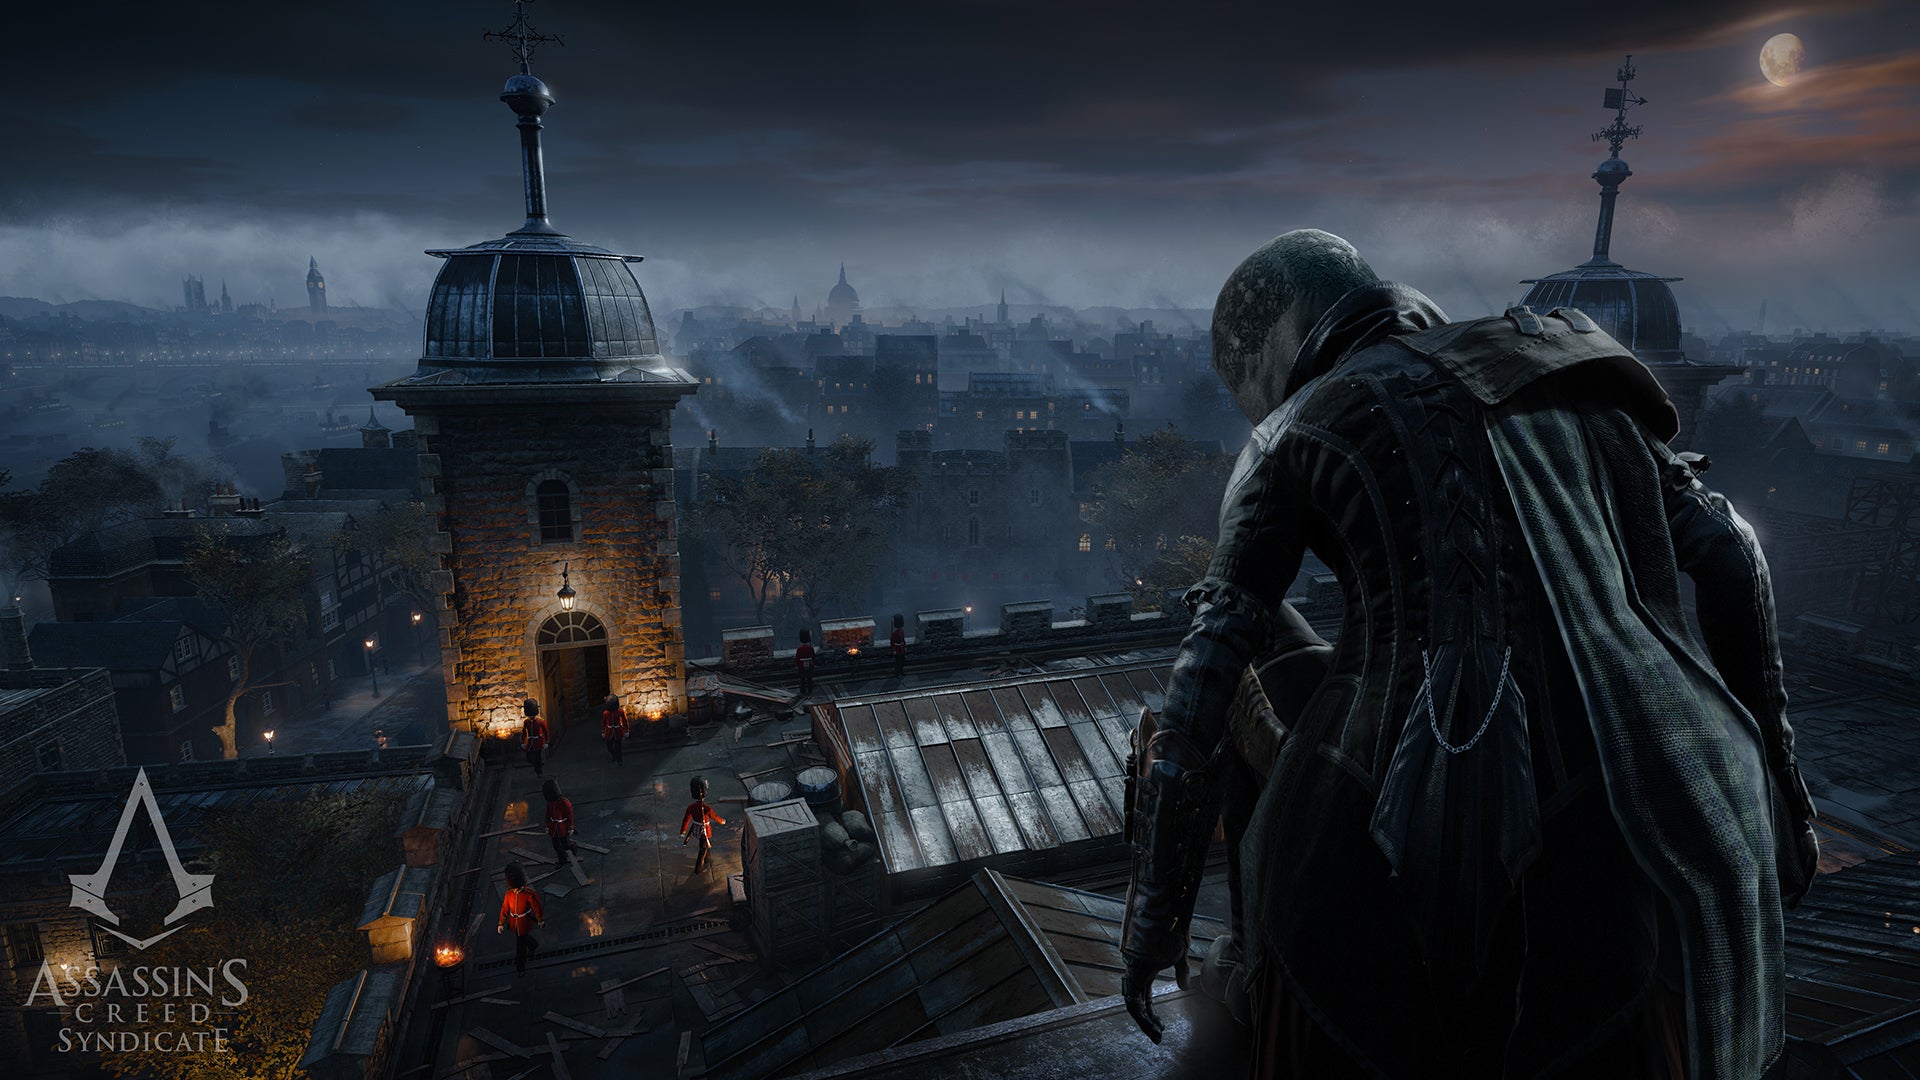 Image for Assassin's Creed Syndicate - watch Evie Frye's overpowered skills at play